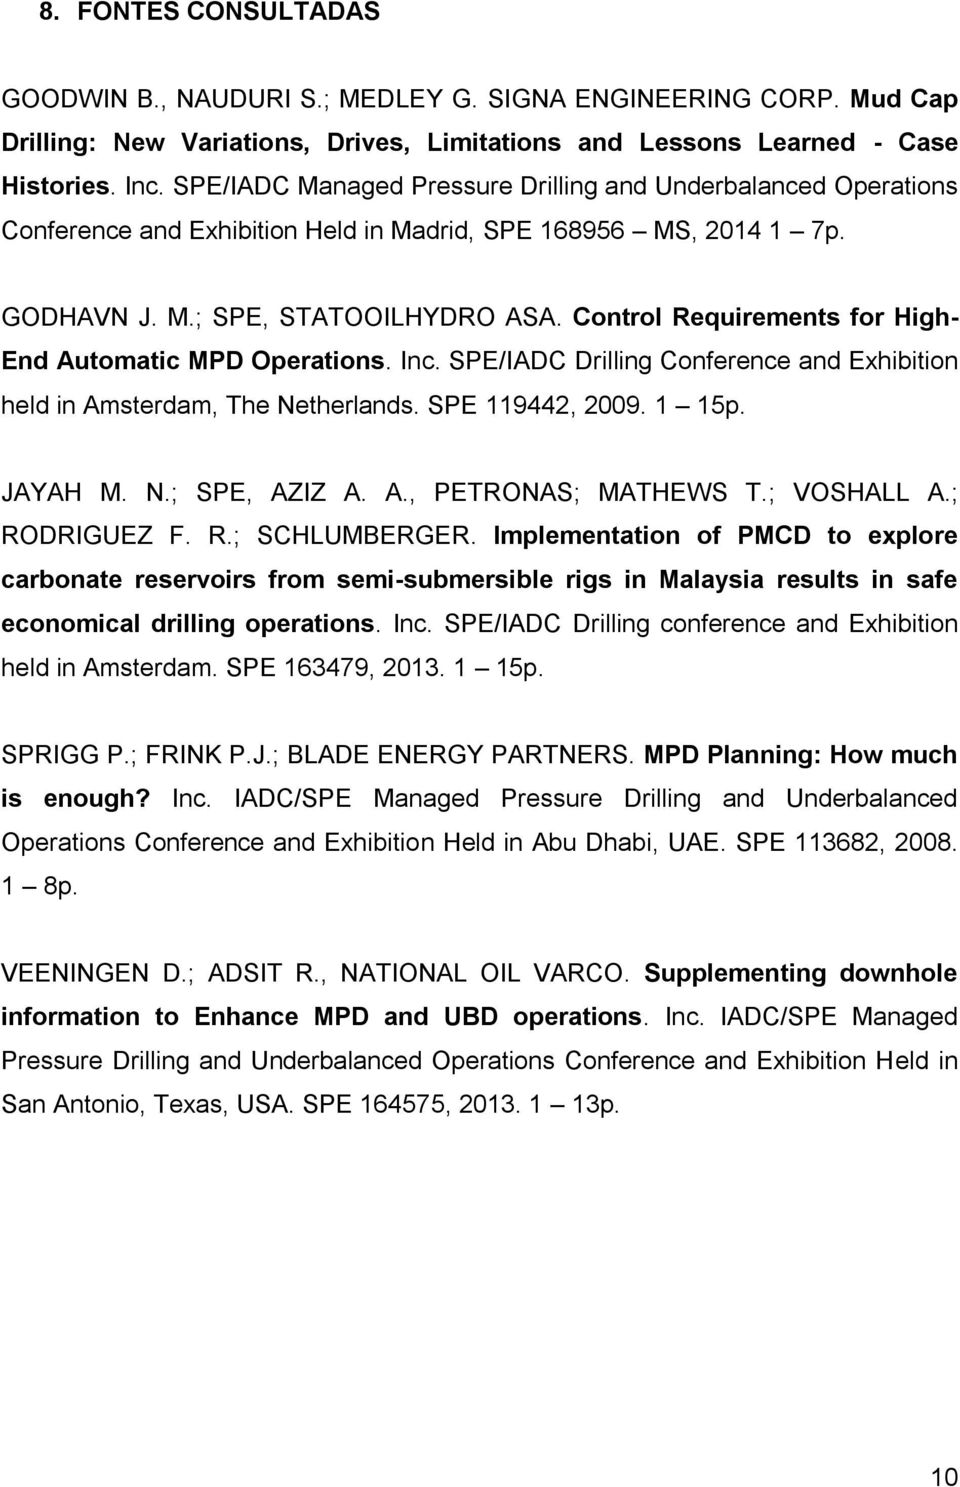 Control Requirements for High- End Automatic MPD Operations. Inc. SPE/IADC Drilling Conference and Exhibition held in Amsterdam, The Netherlands. SPE 119442, 2009. 1 15p. JAYAH M. N.; SPE, AZIZ A. A., PETRONAS; MATHEWS T.